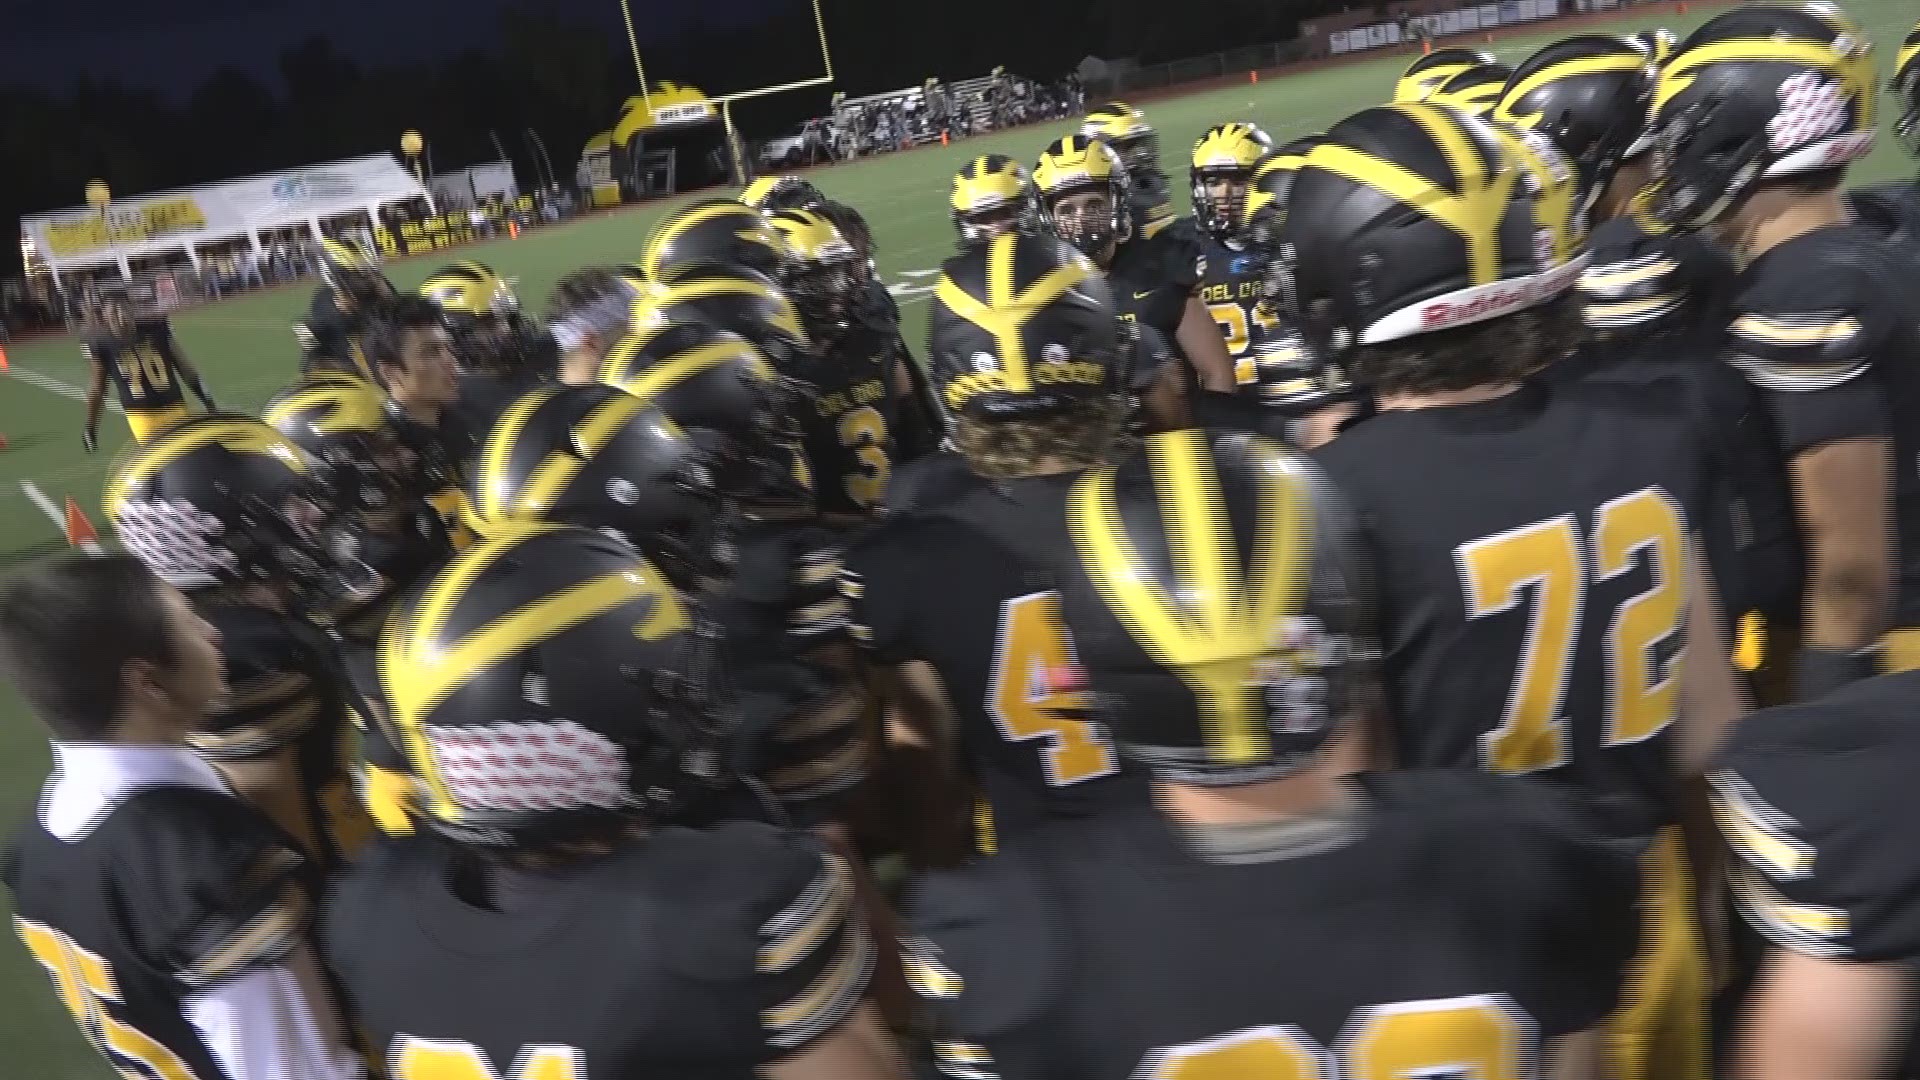 The Del Oro Golden Eagles put on a dominant 56-21 performance on homecoming against the Oak Ridge Trojans in our ABC10 Game of the Week.